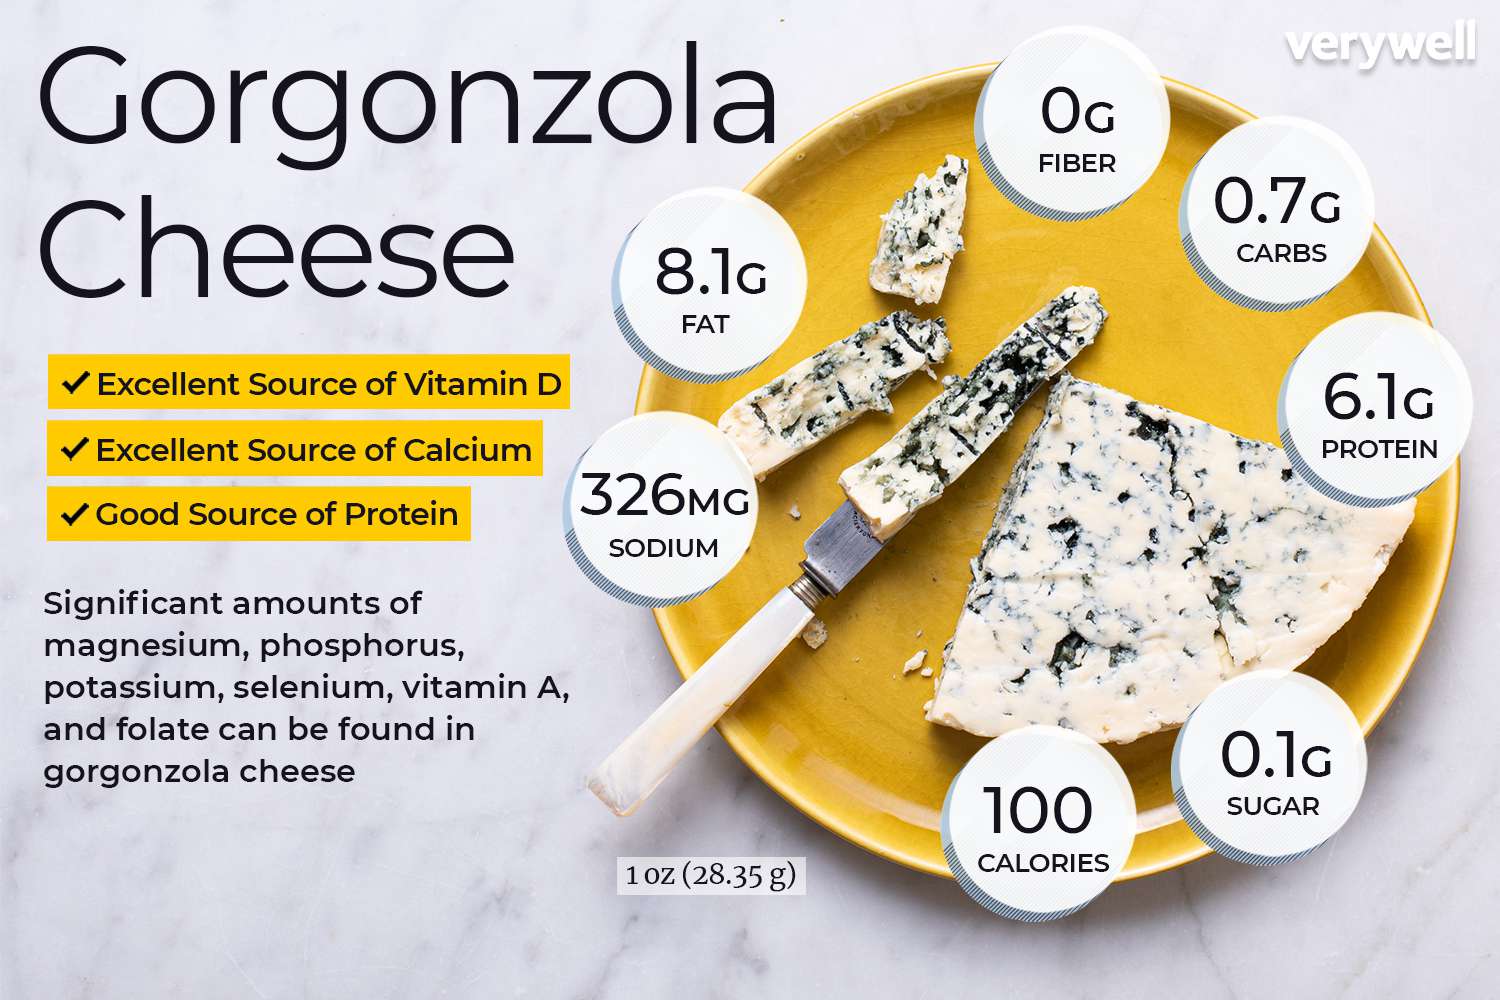 Gorgonzola cheese nutrition facts